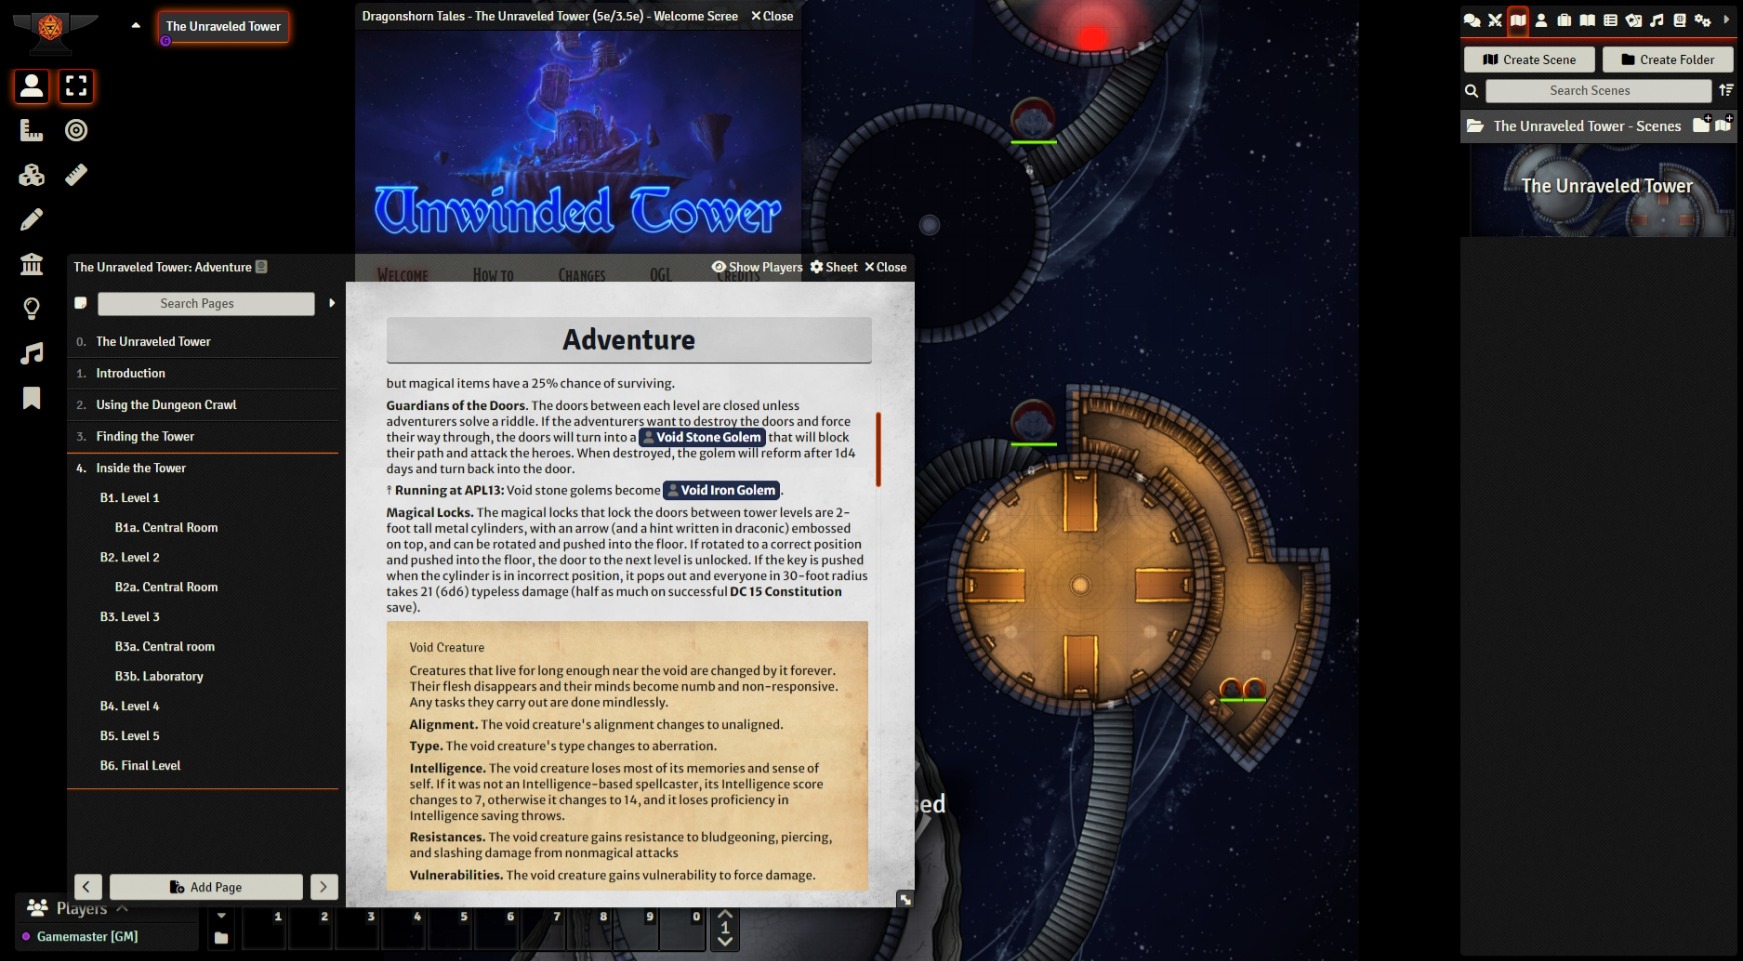 Dungeon Crawl - The Unraveled Tower Foundry VTT Screenhost